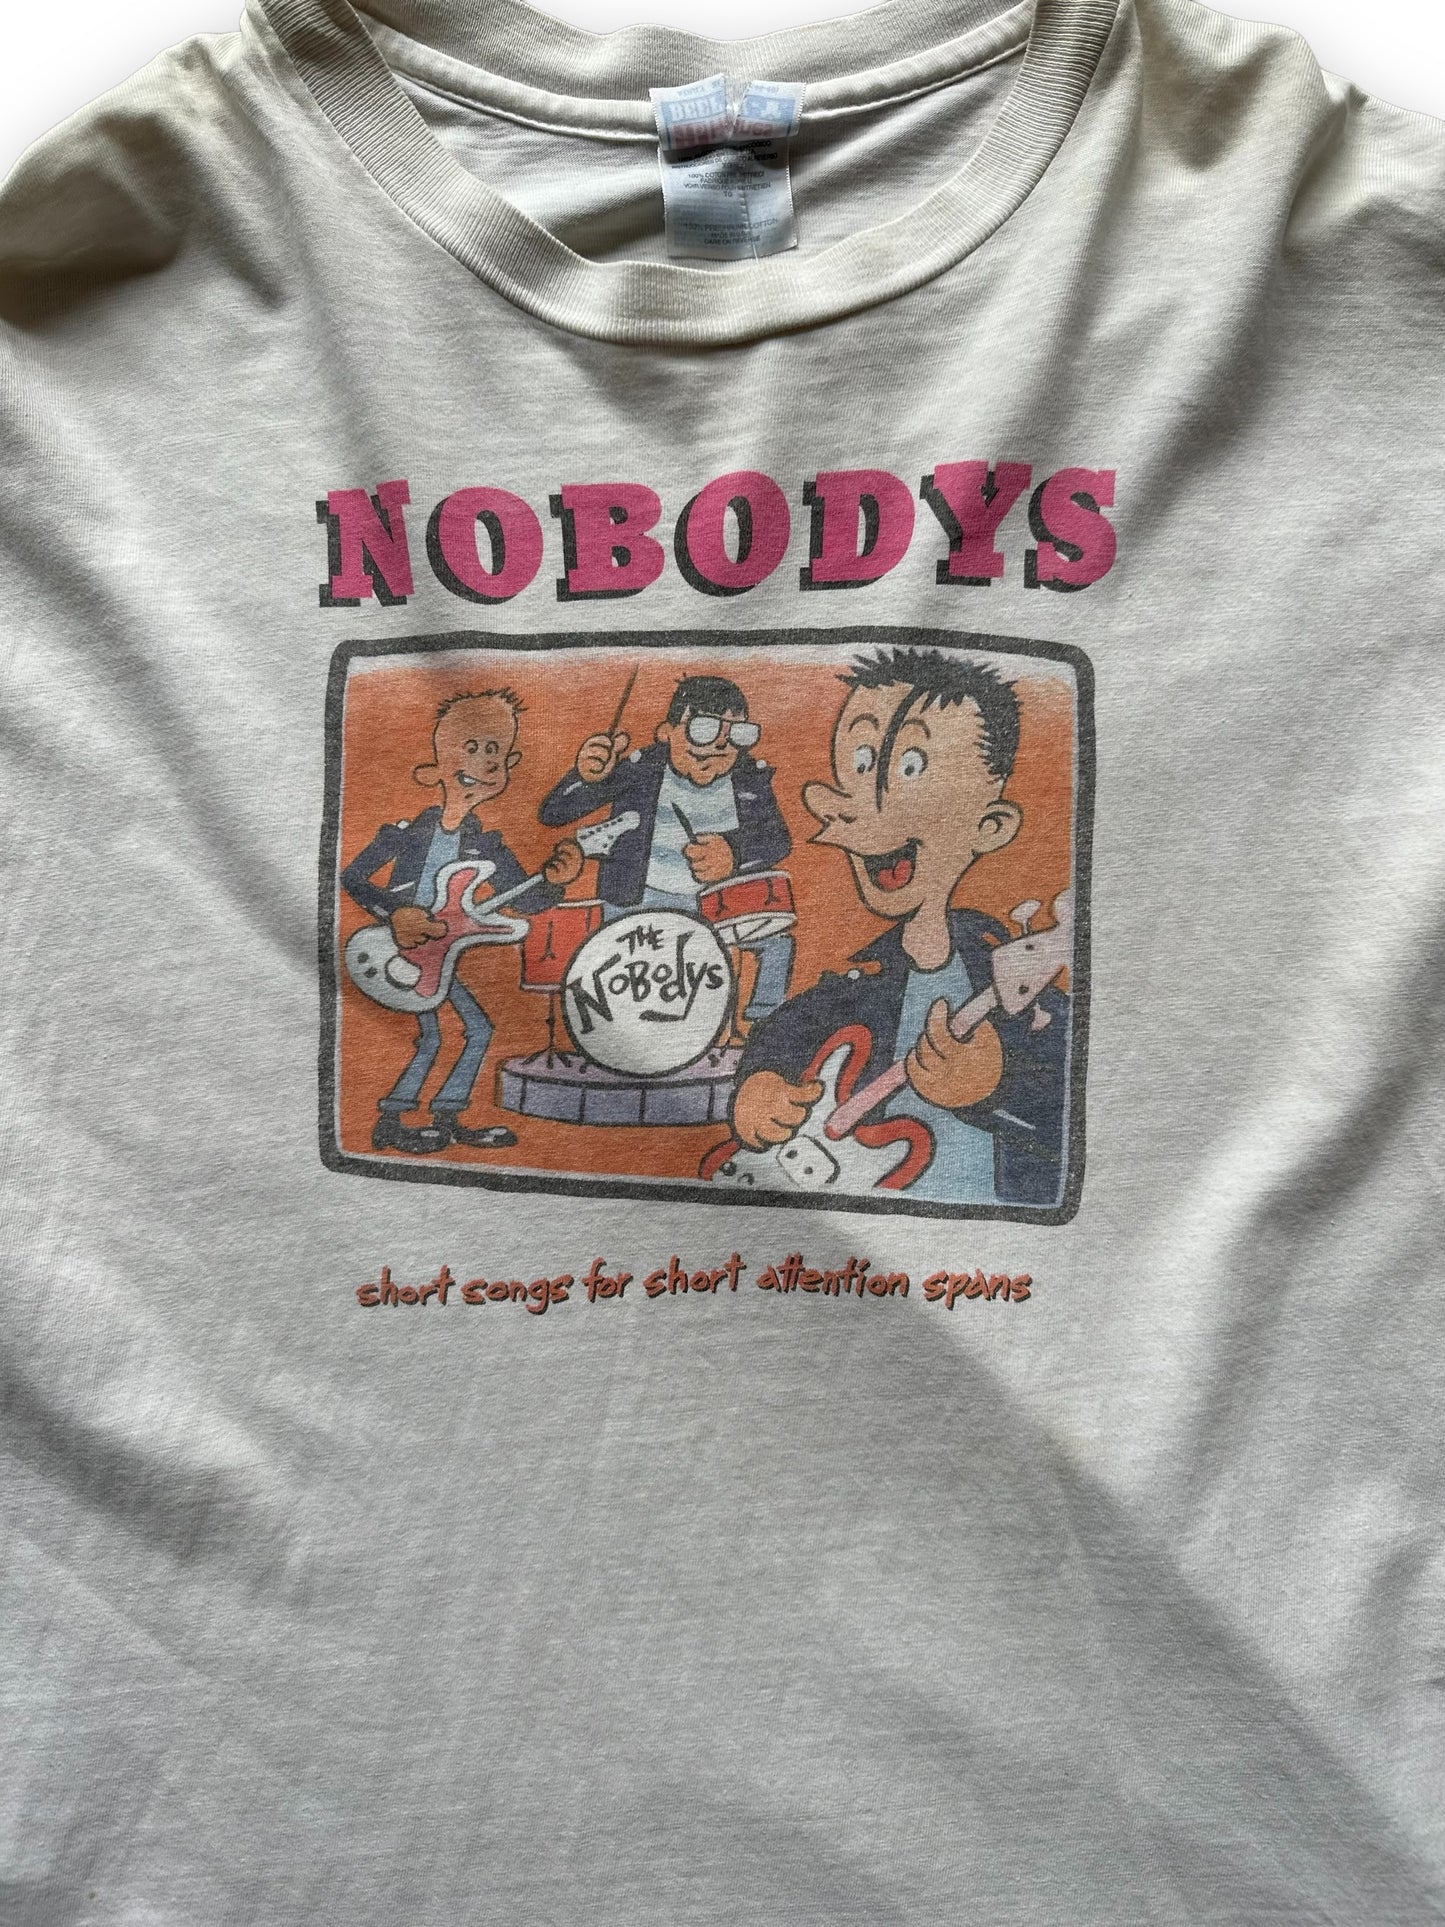 Front Graphic Close Up on Vintage The Nobodys Short Songs For Short Attention Spans Tee SZ XL |  Hopeless Records Rock Tee | Barn Owl Vintage Seattle